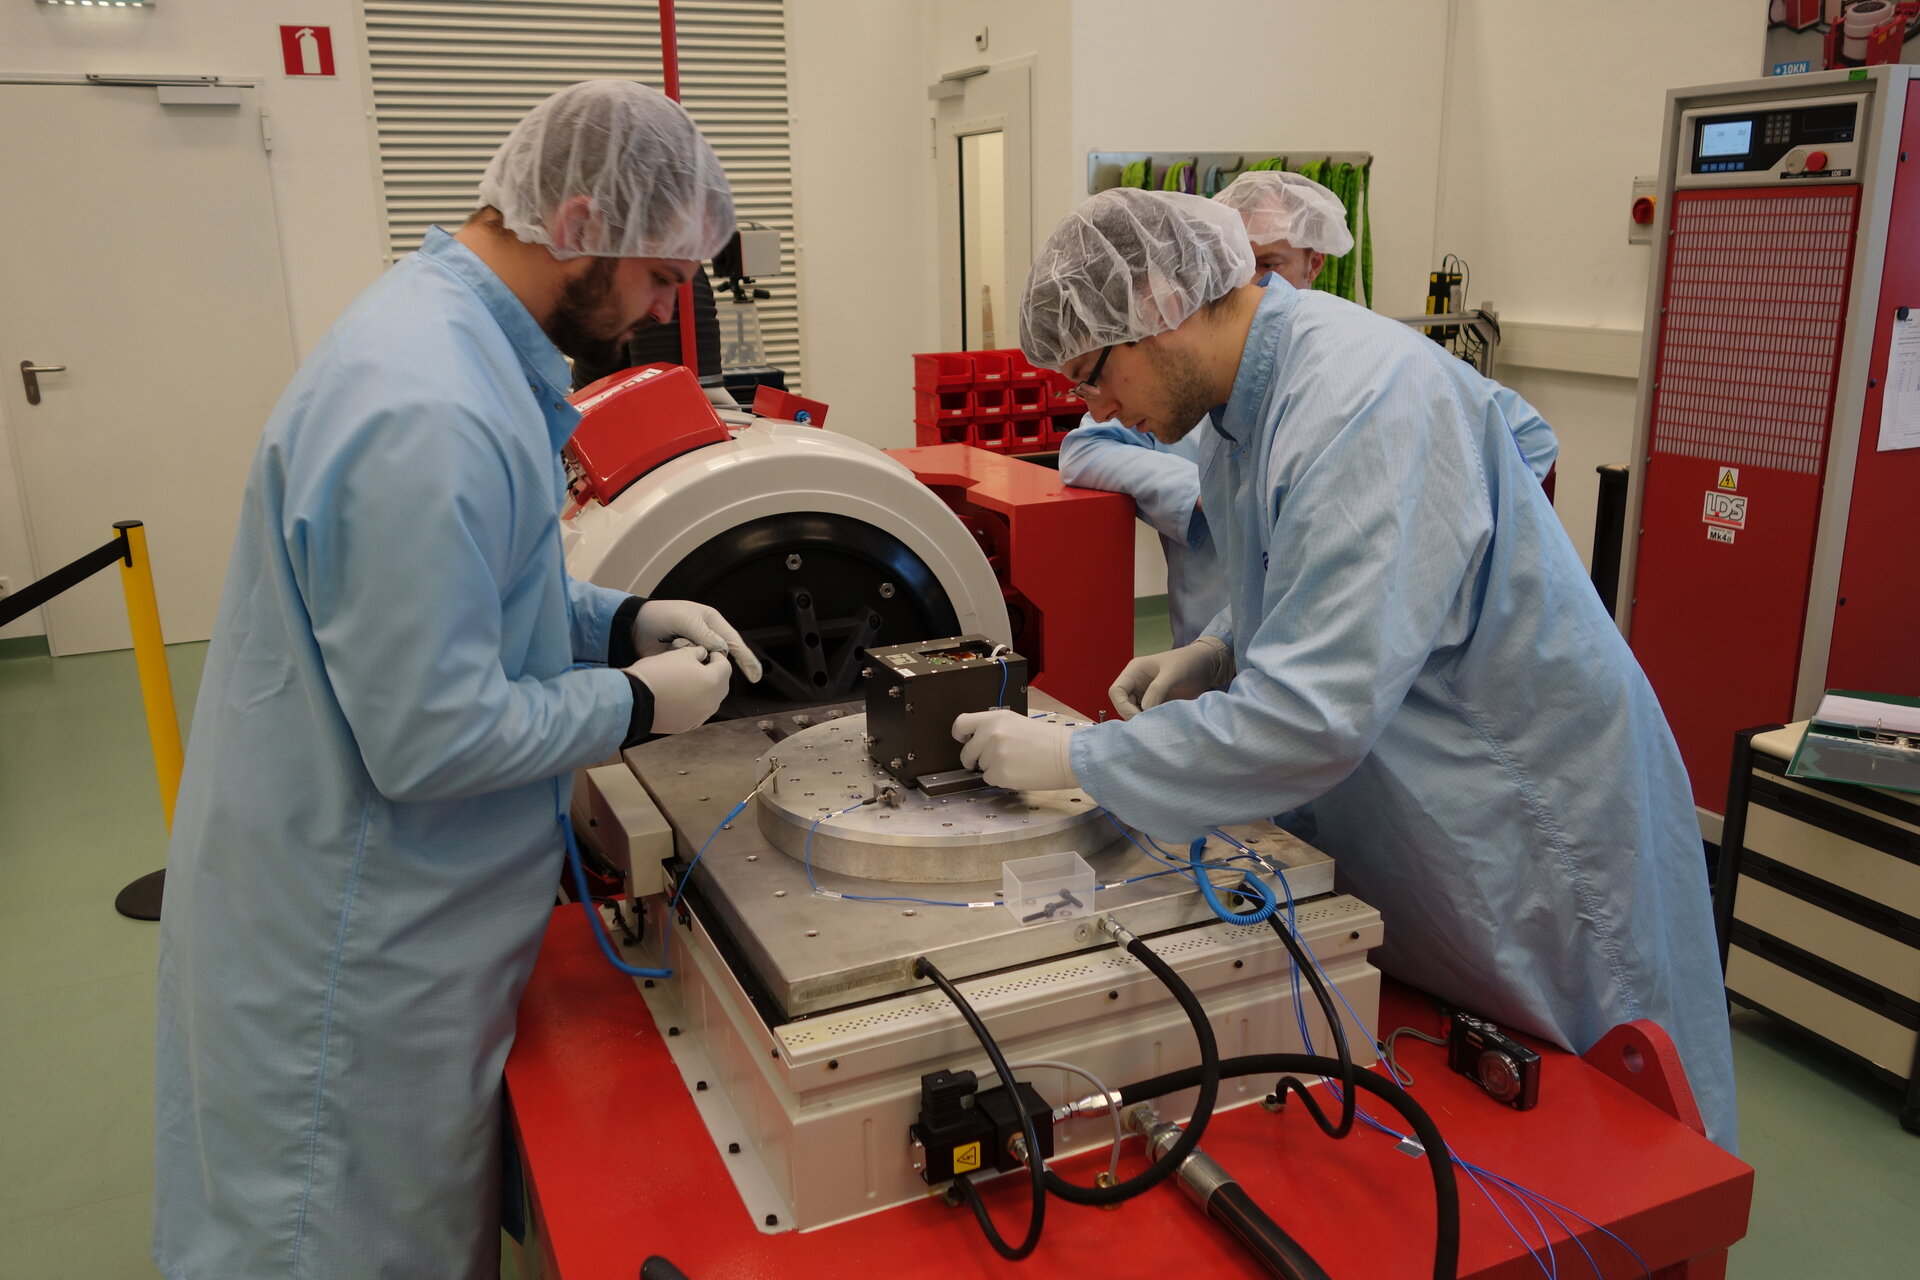 Installation of OUFTI-1 on the electrodynamic shaker at ESTEC 